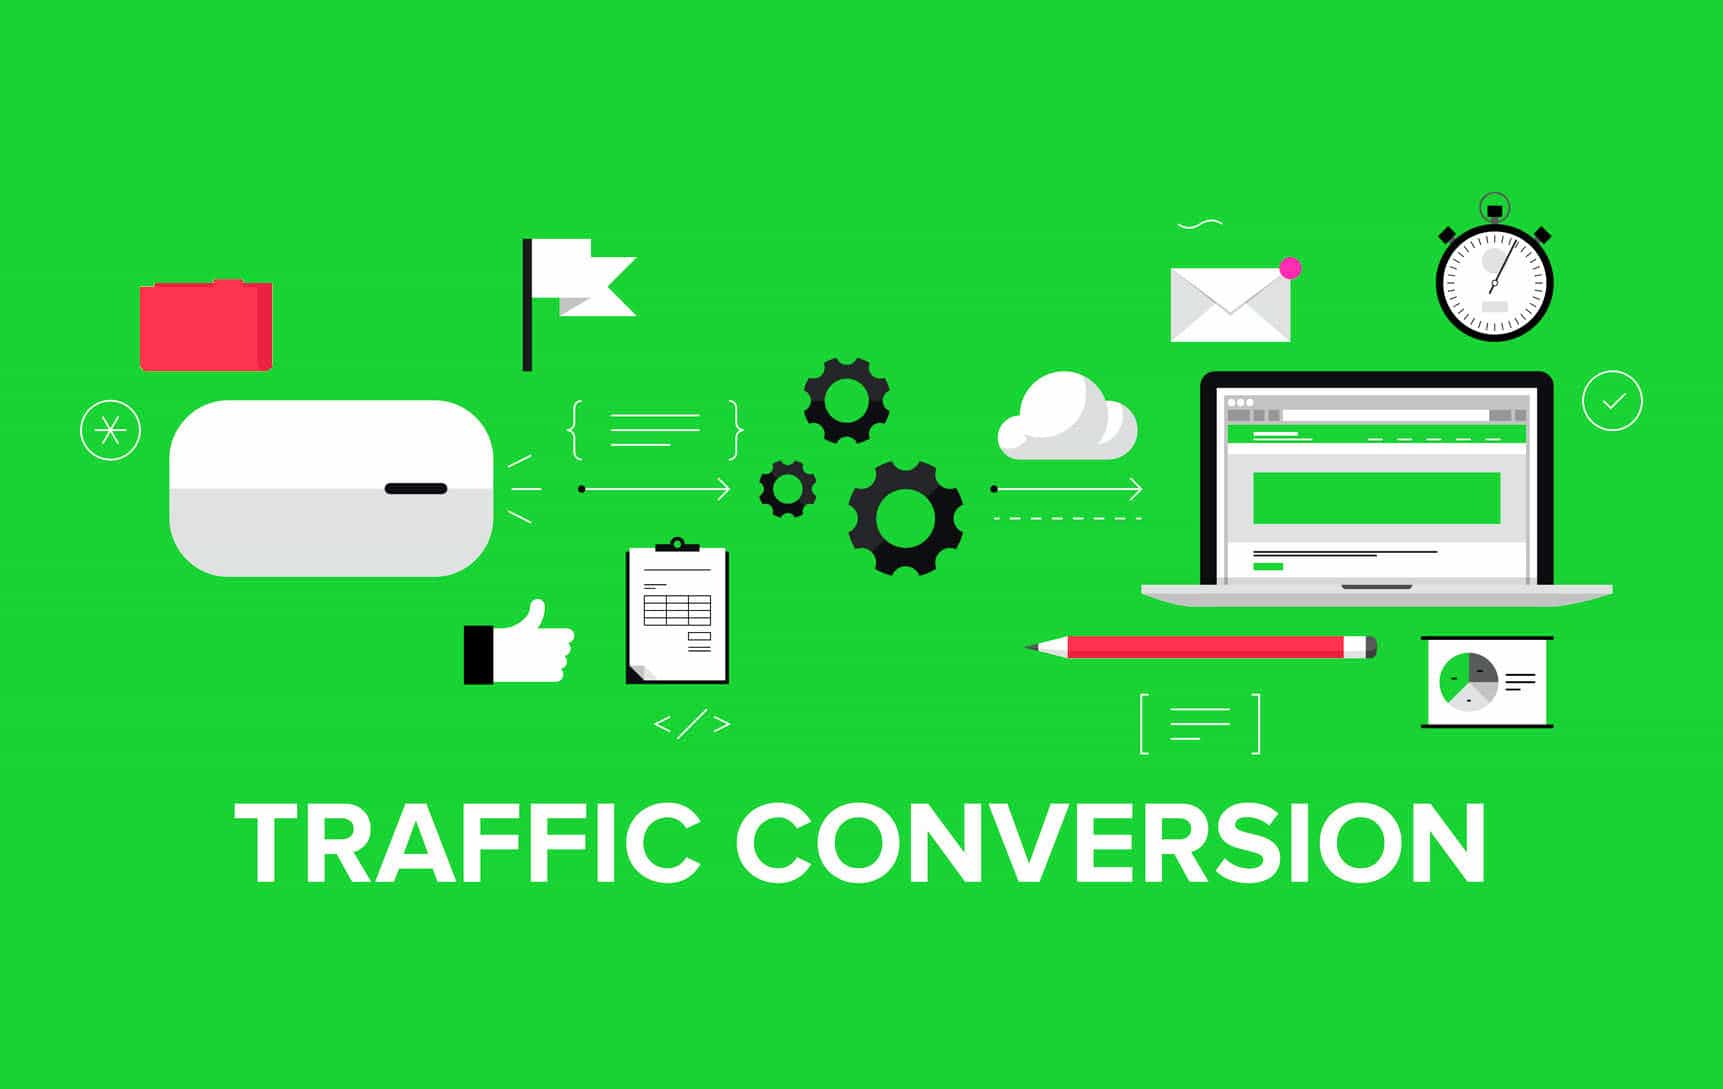 Web Conversions into leads and Sales